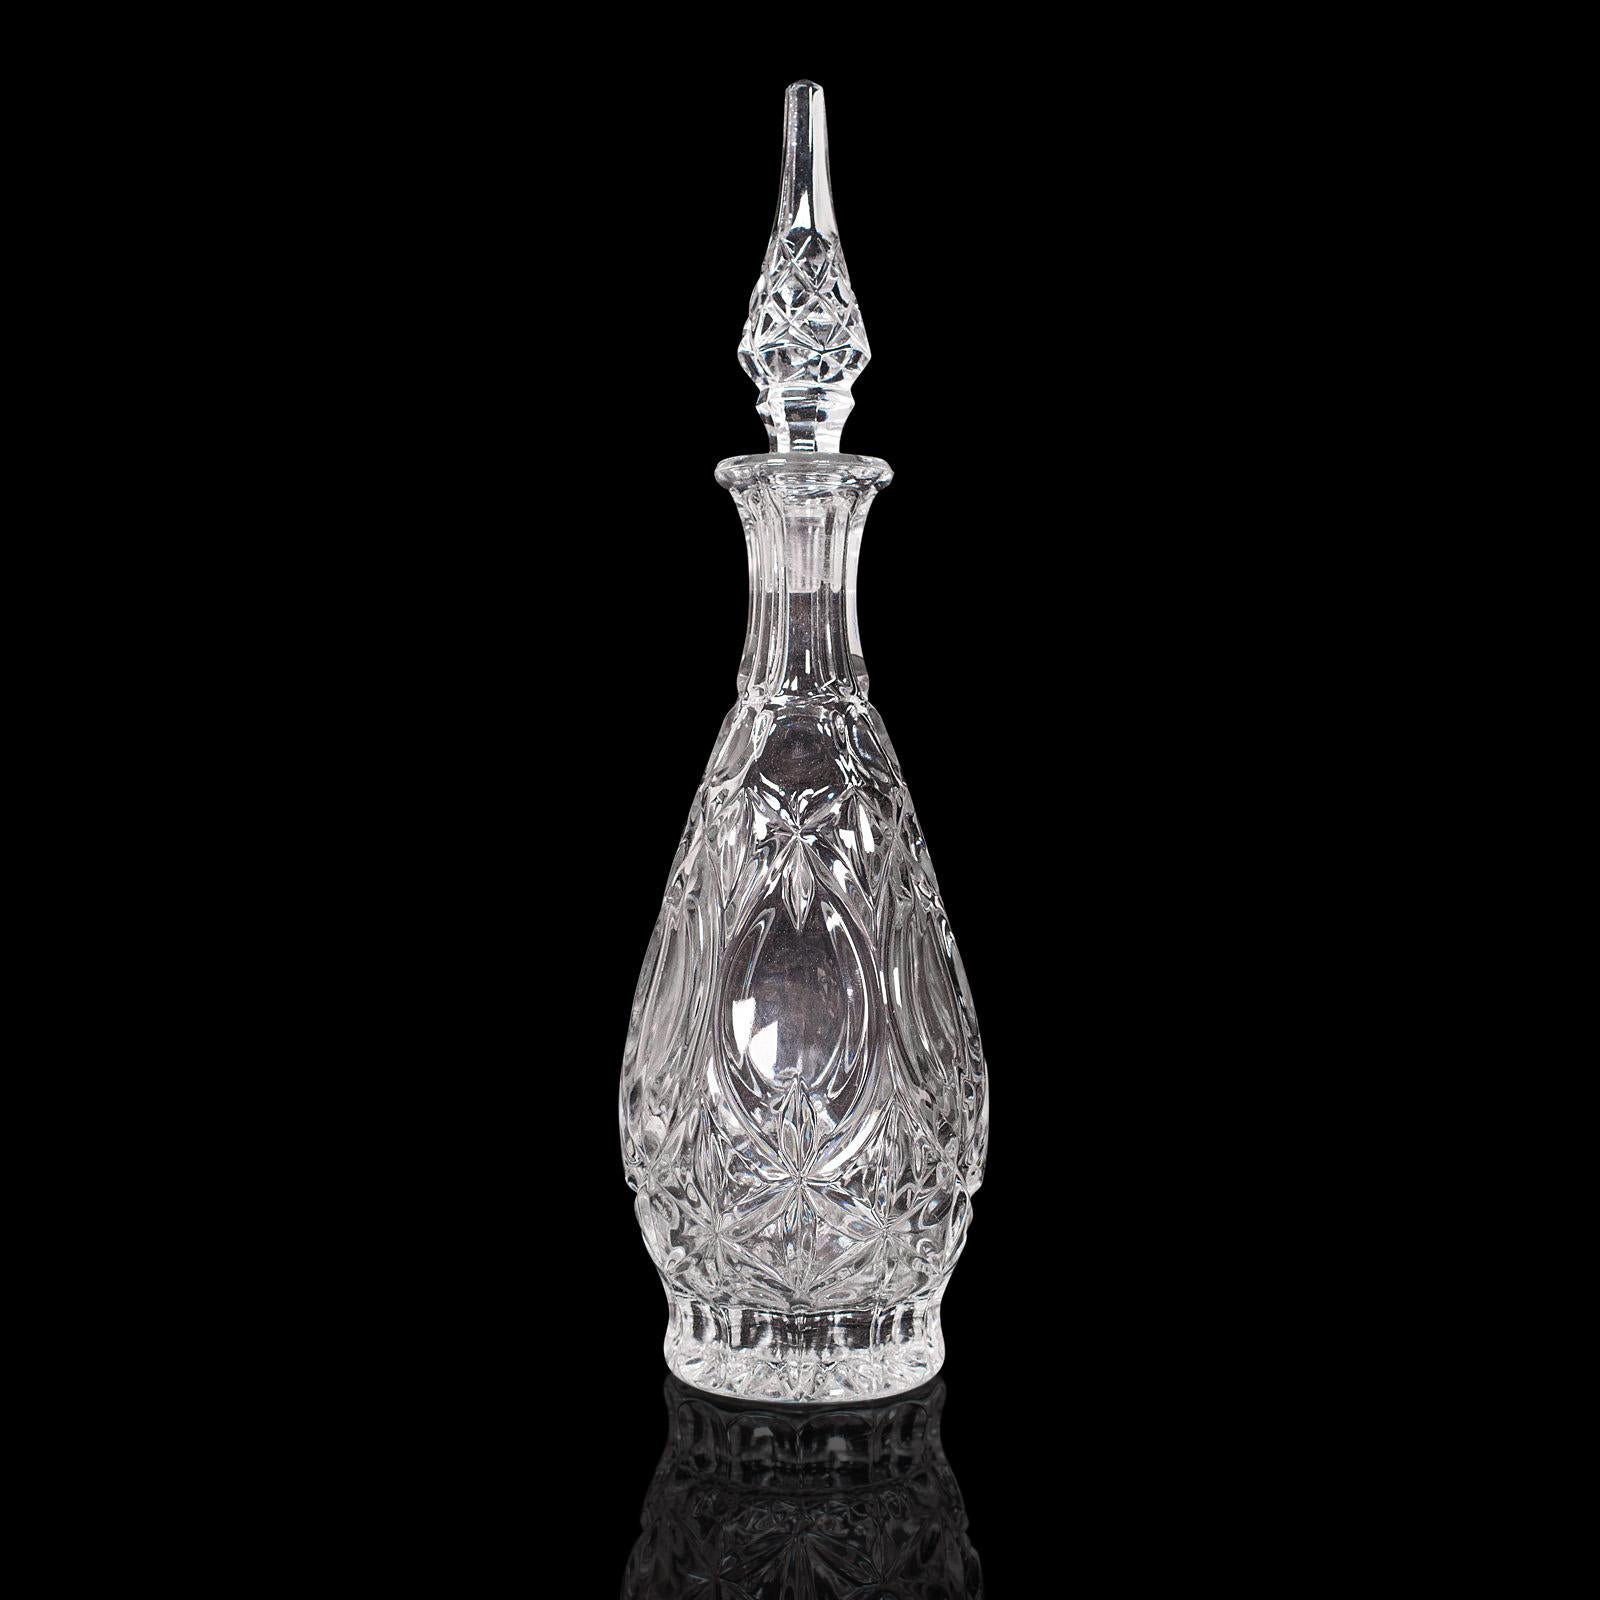 This is a vintage burgundy decanter. A French, cut glass wine vessel in Art Deco taste, dating to the mid 20th century, circa 1950.

Elegant decanter with ornate Art Deco detail
Displays a desirable aged patina and in good order
Quality cut